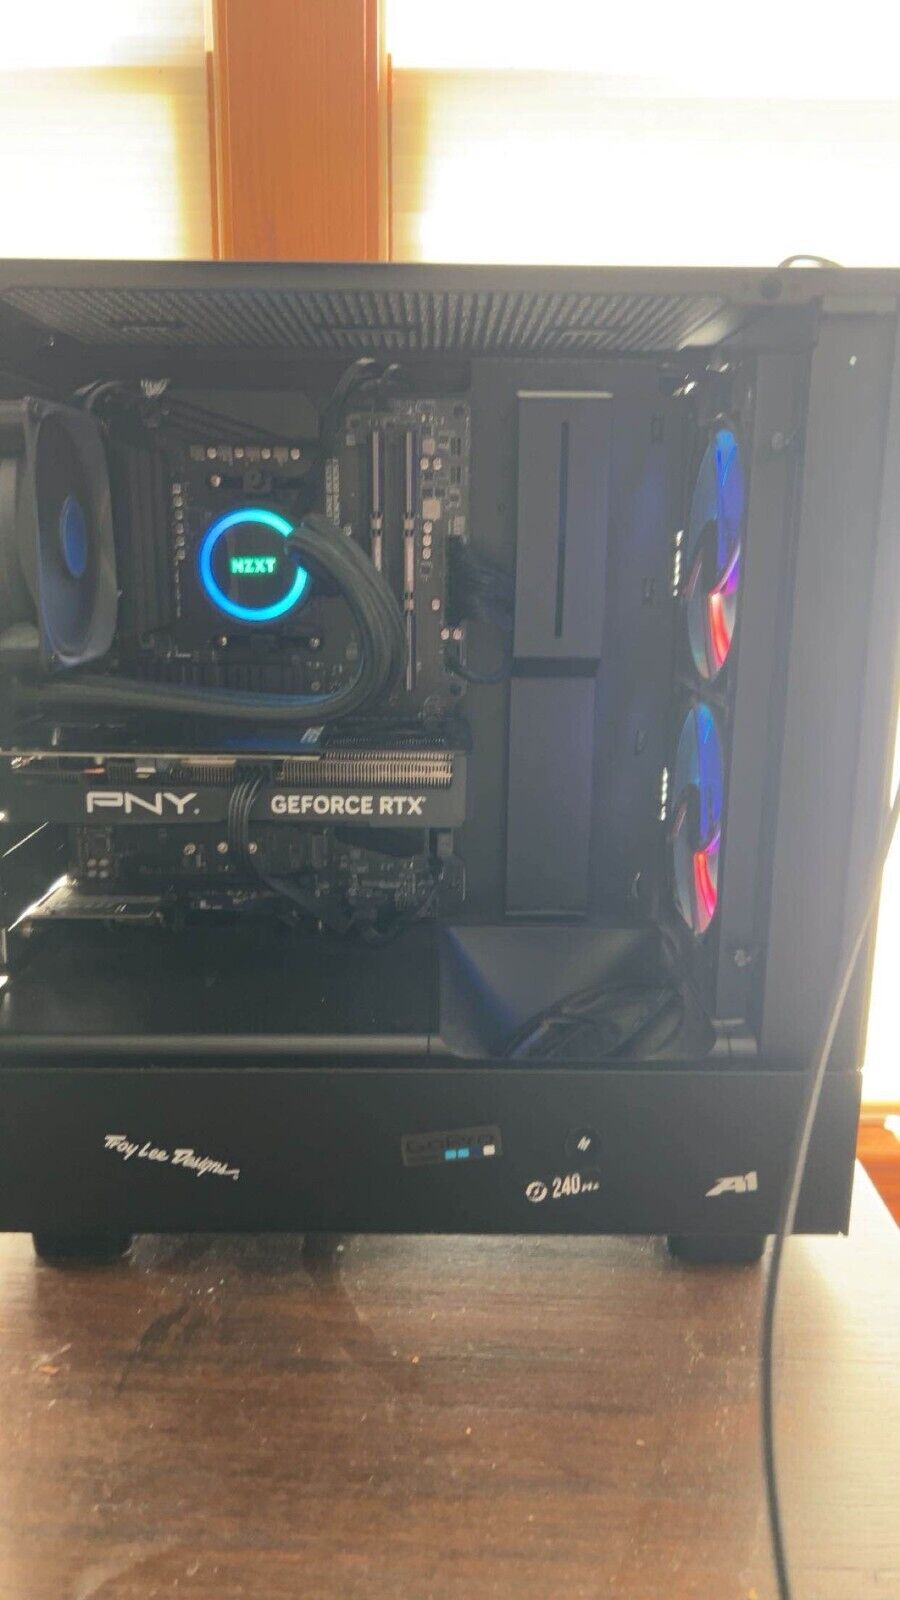 NZXT Gaming Computer. This computer has great specs and is in great condition